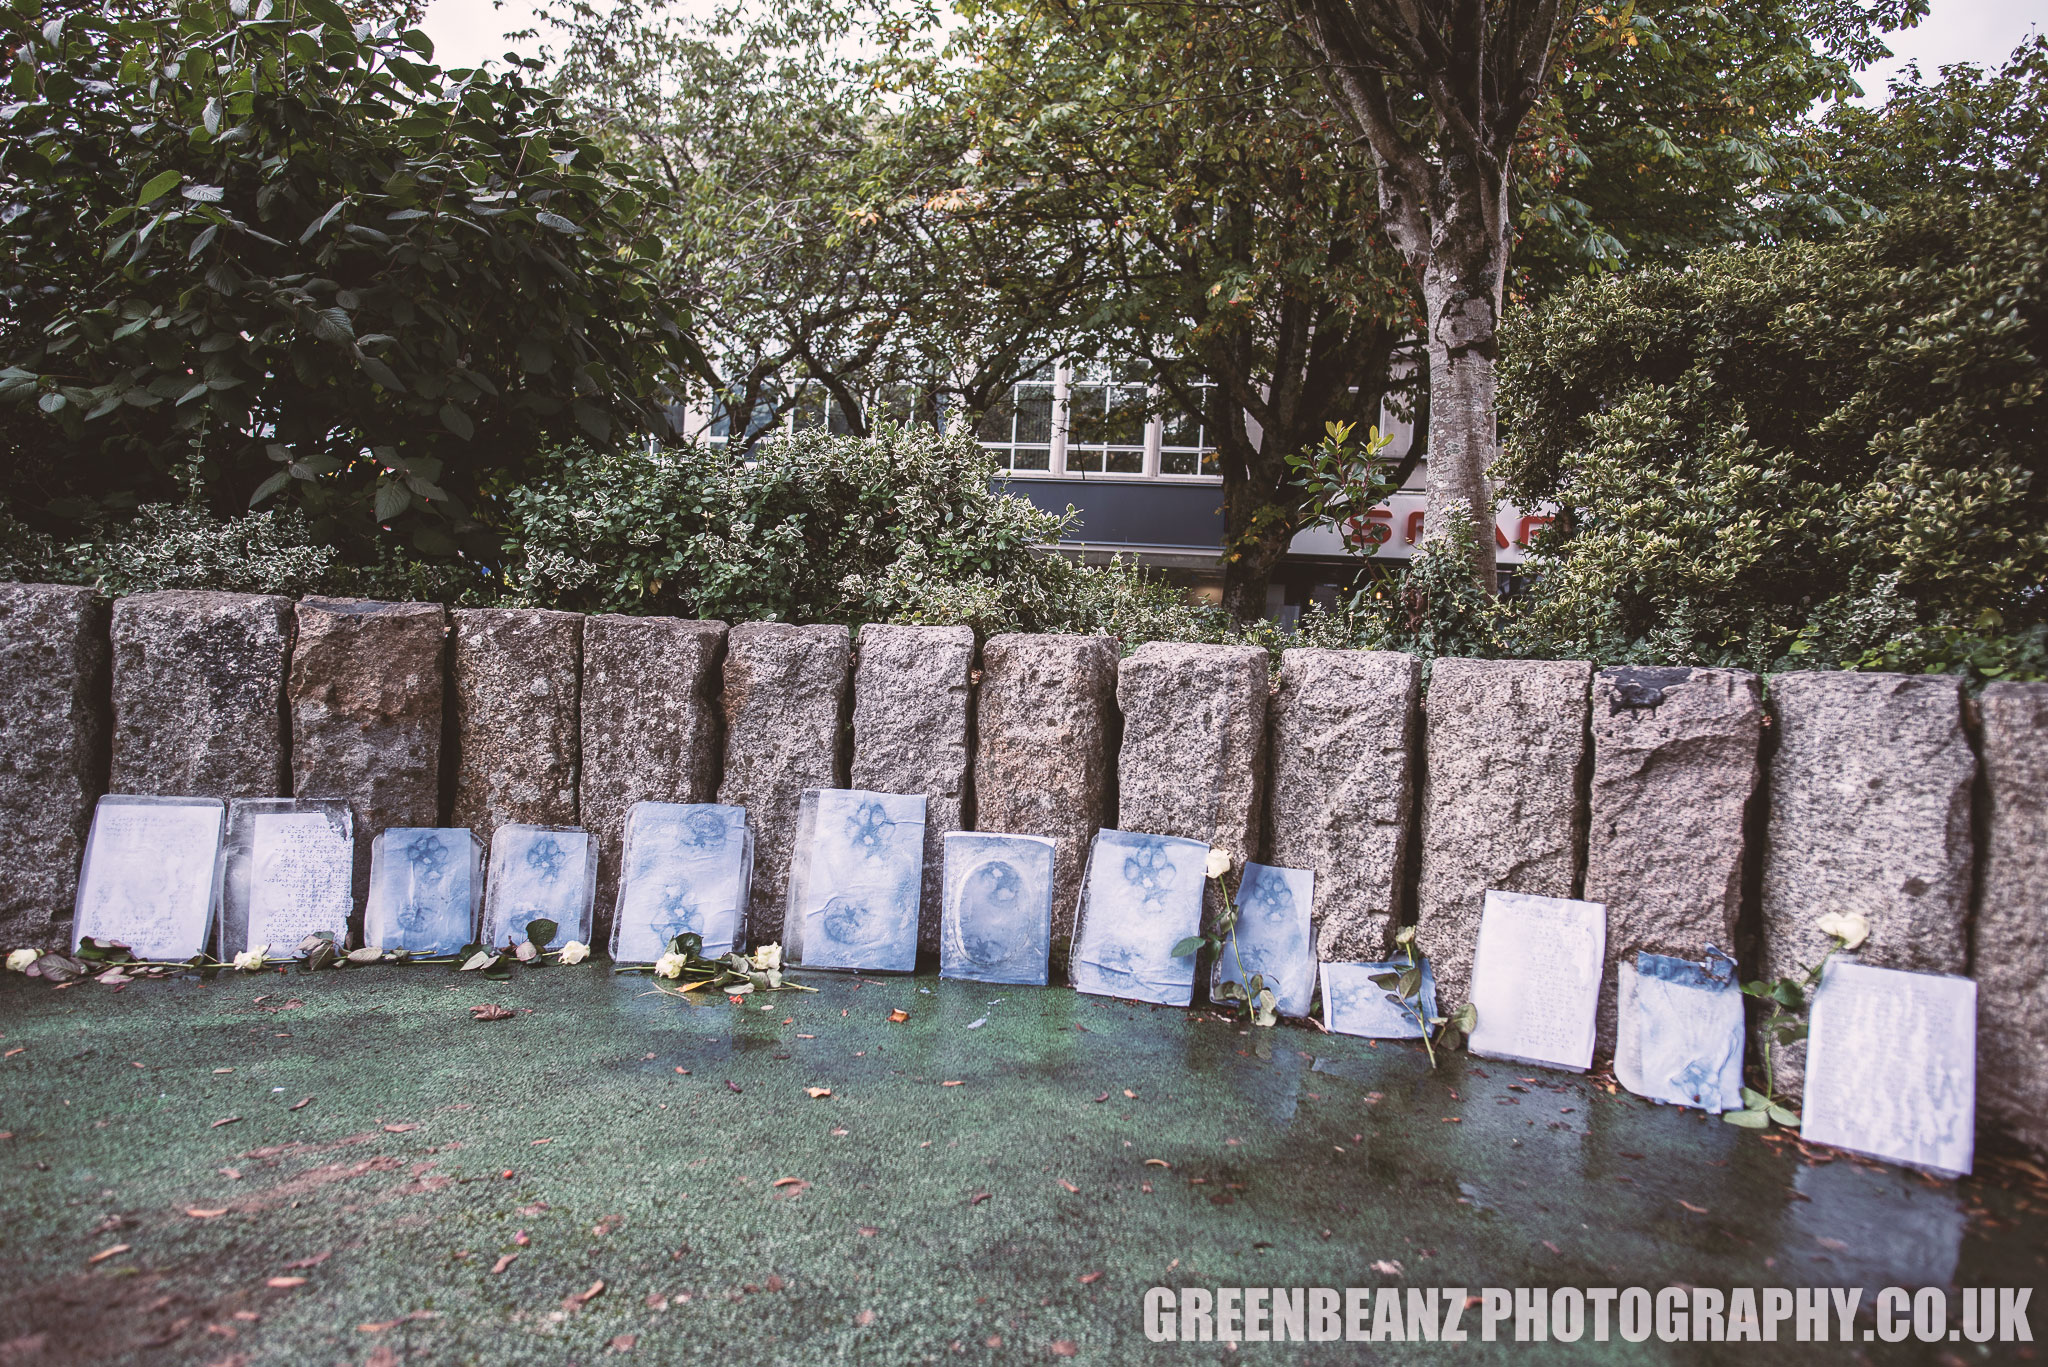 The Ice tombstones from Laura Denning's 'Go Rewild Yourself' artwork 2019